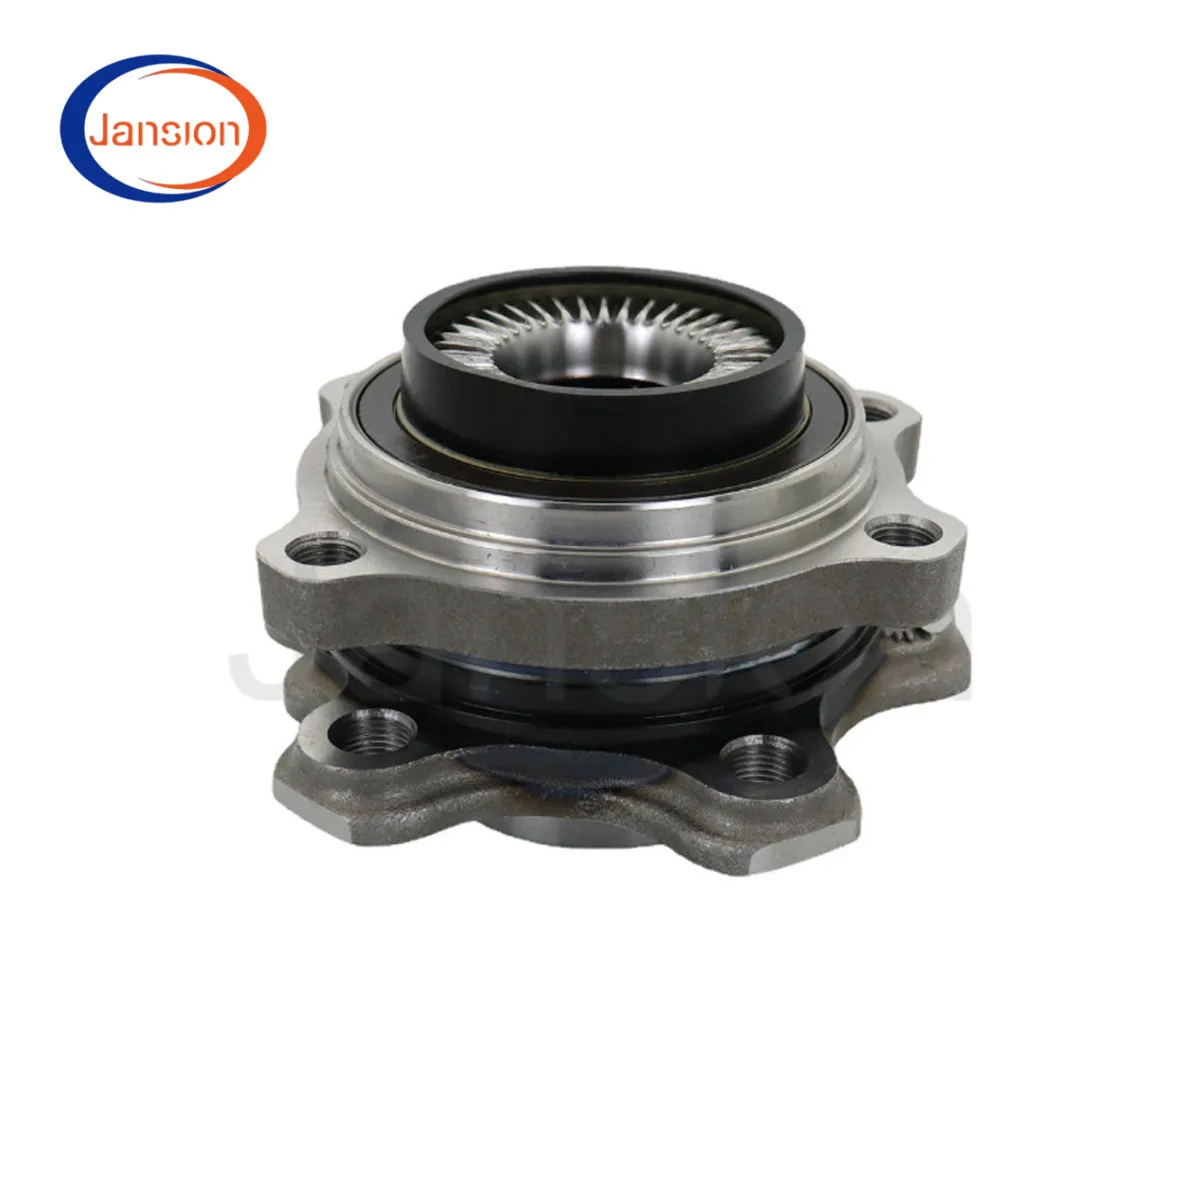 

FRONT WHEEL BEARING HUB ASSEMBLY 31202408656 FOR BMW 3 5 6 7 8 X3 X4 Z4 G20 G01 G28 F90 31 20 2 408 656